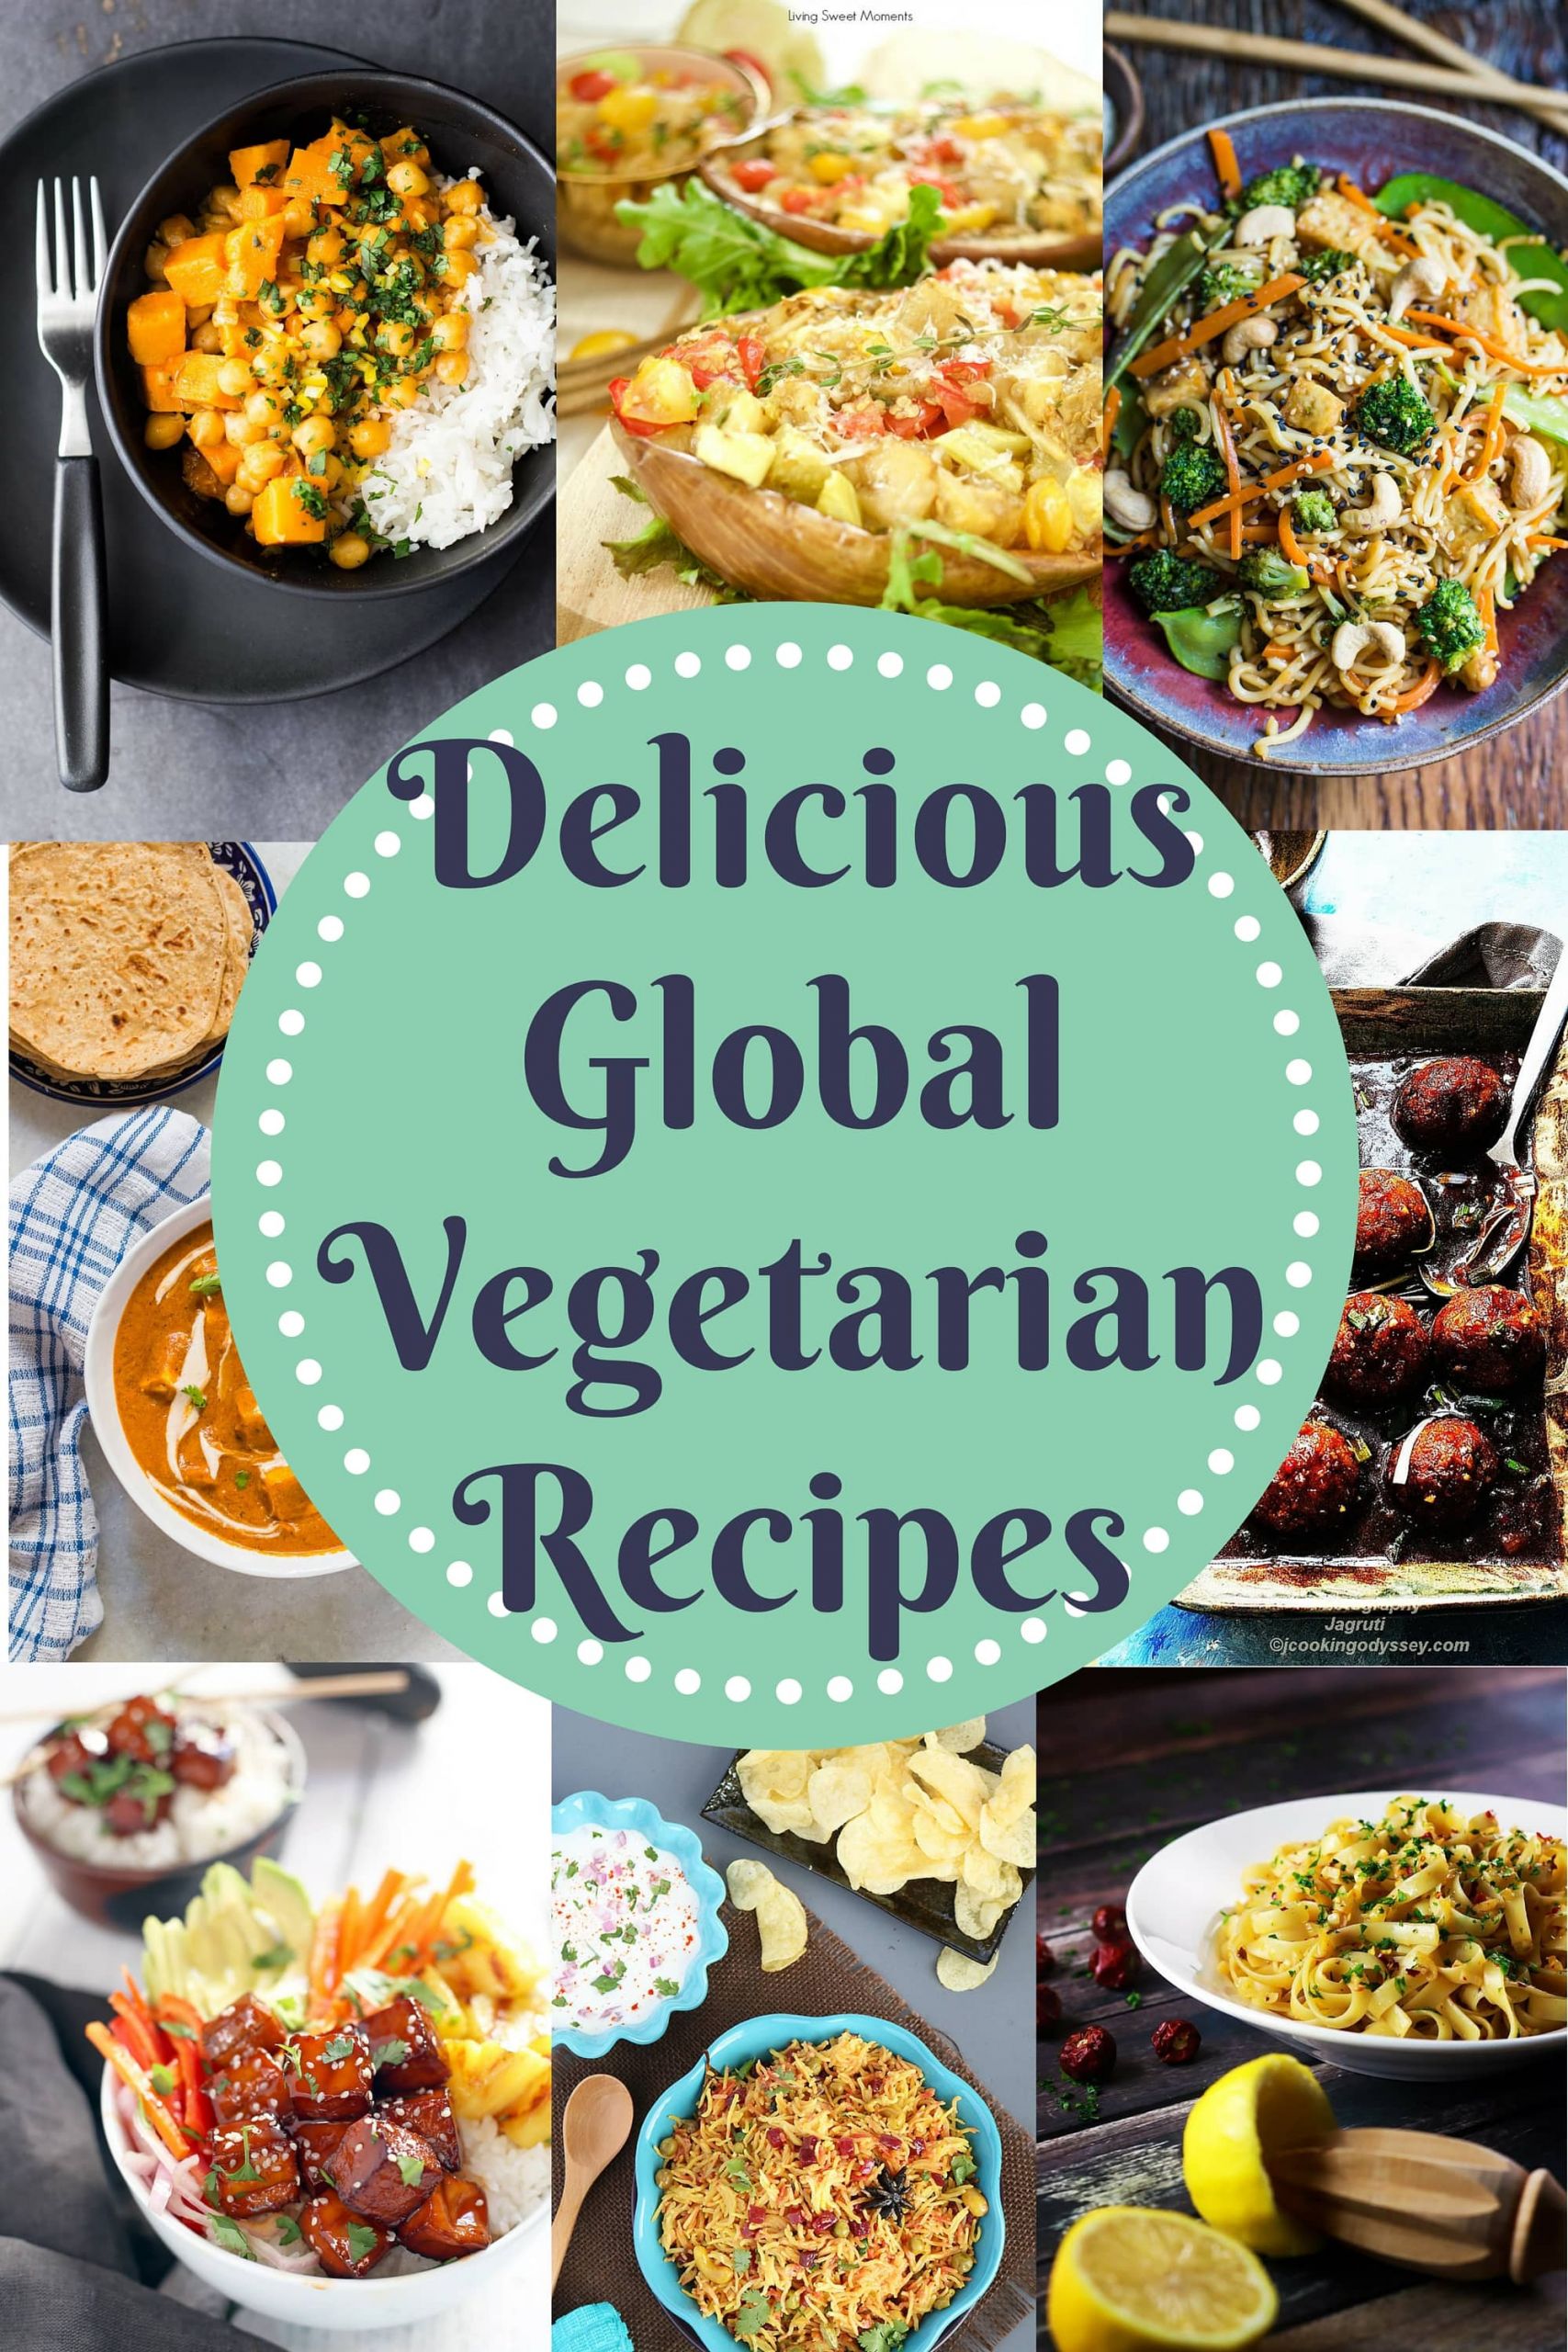 Yummy Vegetarian Recipes
 Delicious Global Ve arian Recipes Pooja s Cookery